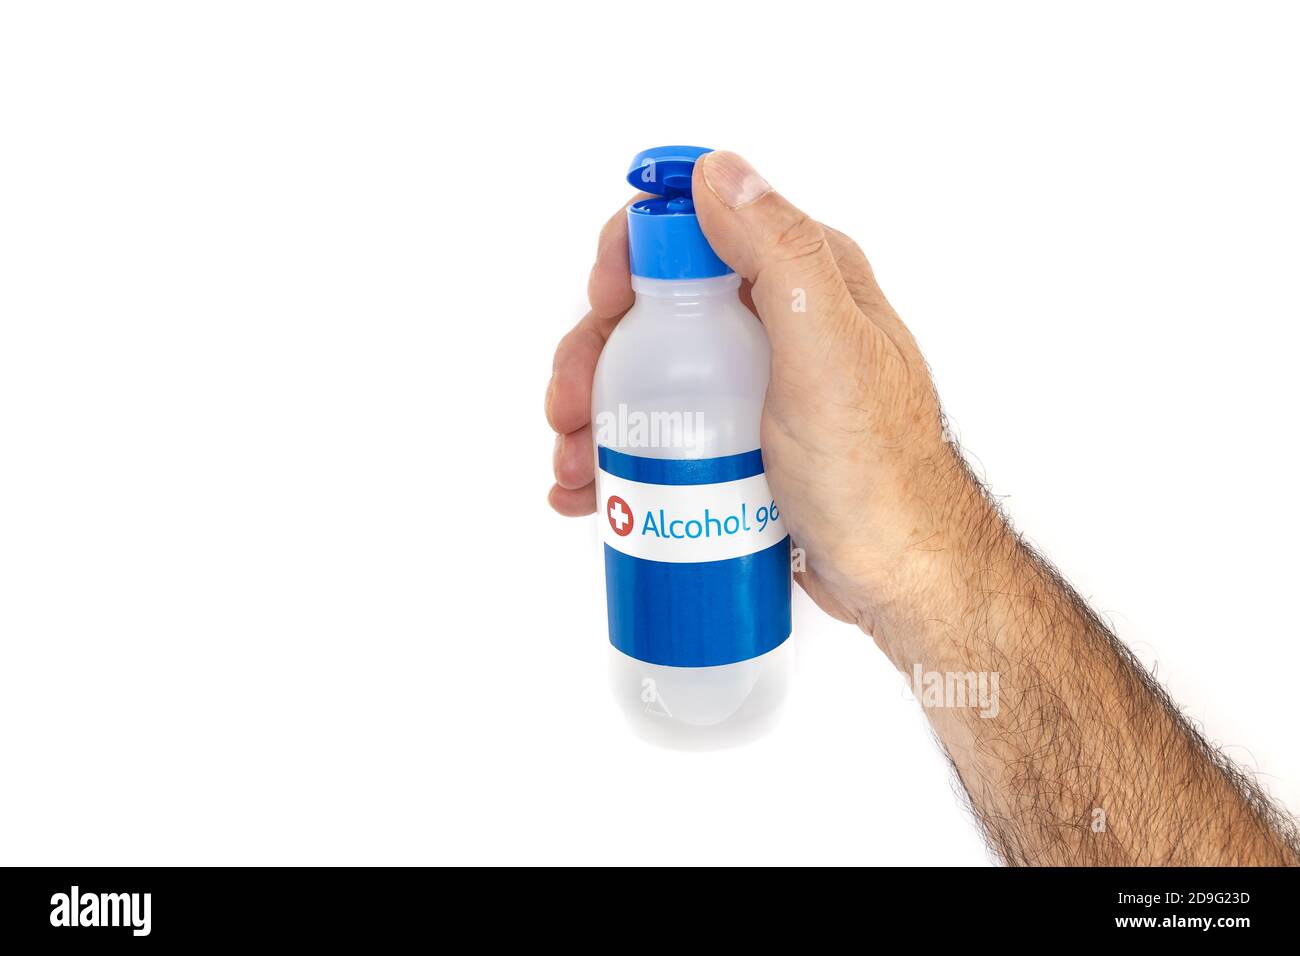 Man hand opening a bottle of disinfectant self care alcohol 96 Stock Photo